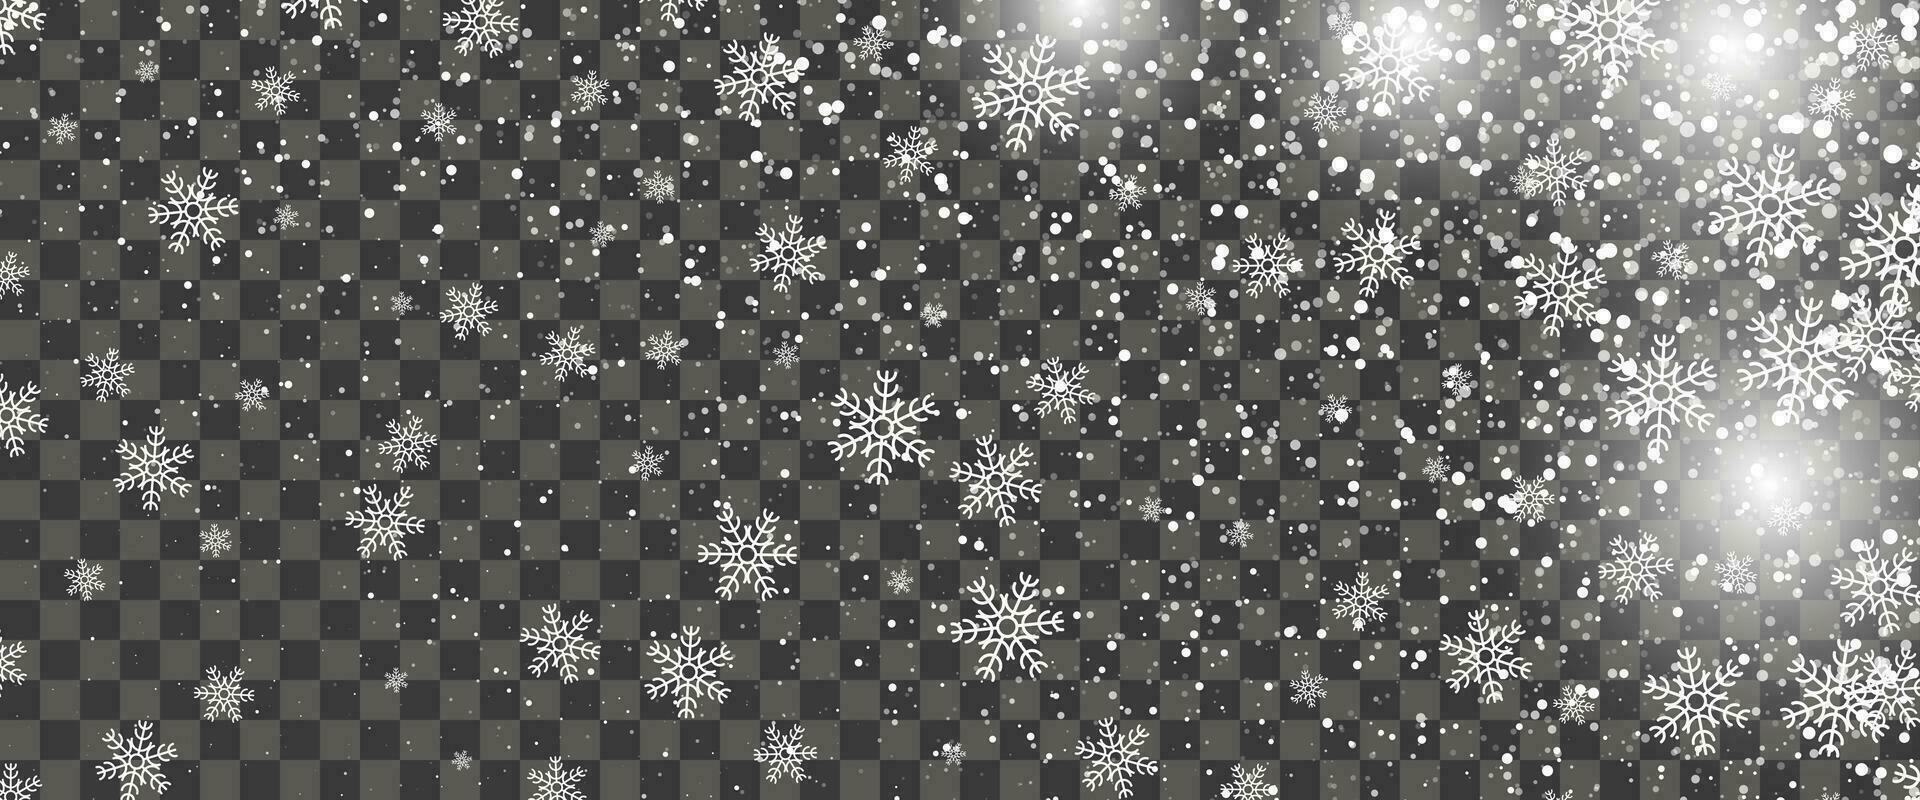 Snowfall and falling snowflakes on background. White snowflakes and Christmas snow. Vector illustration